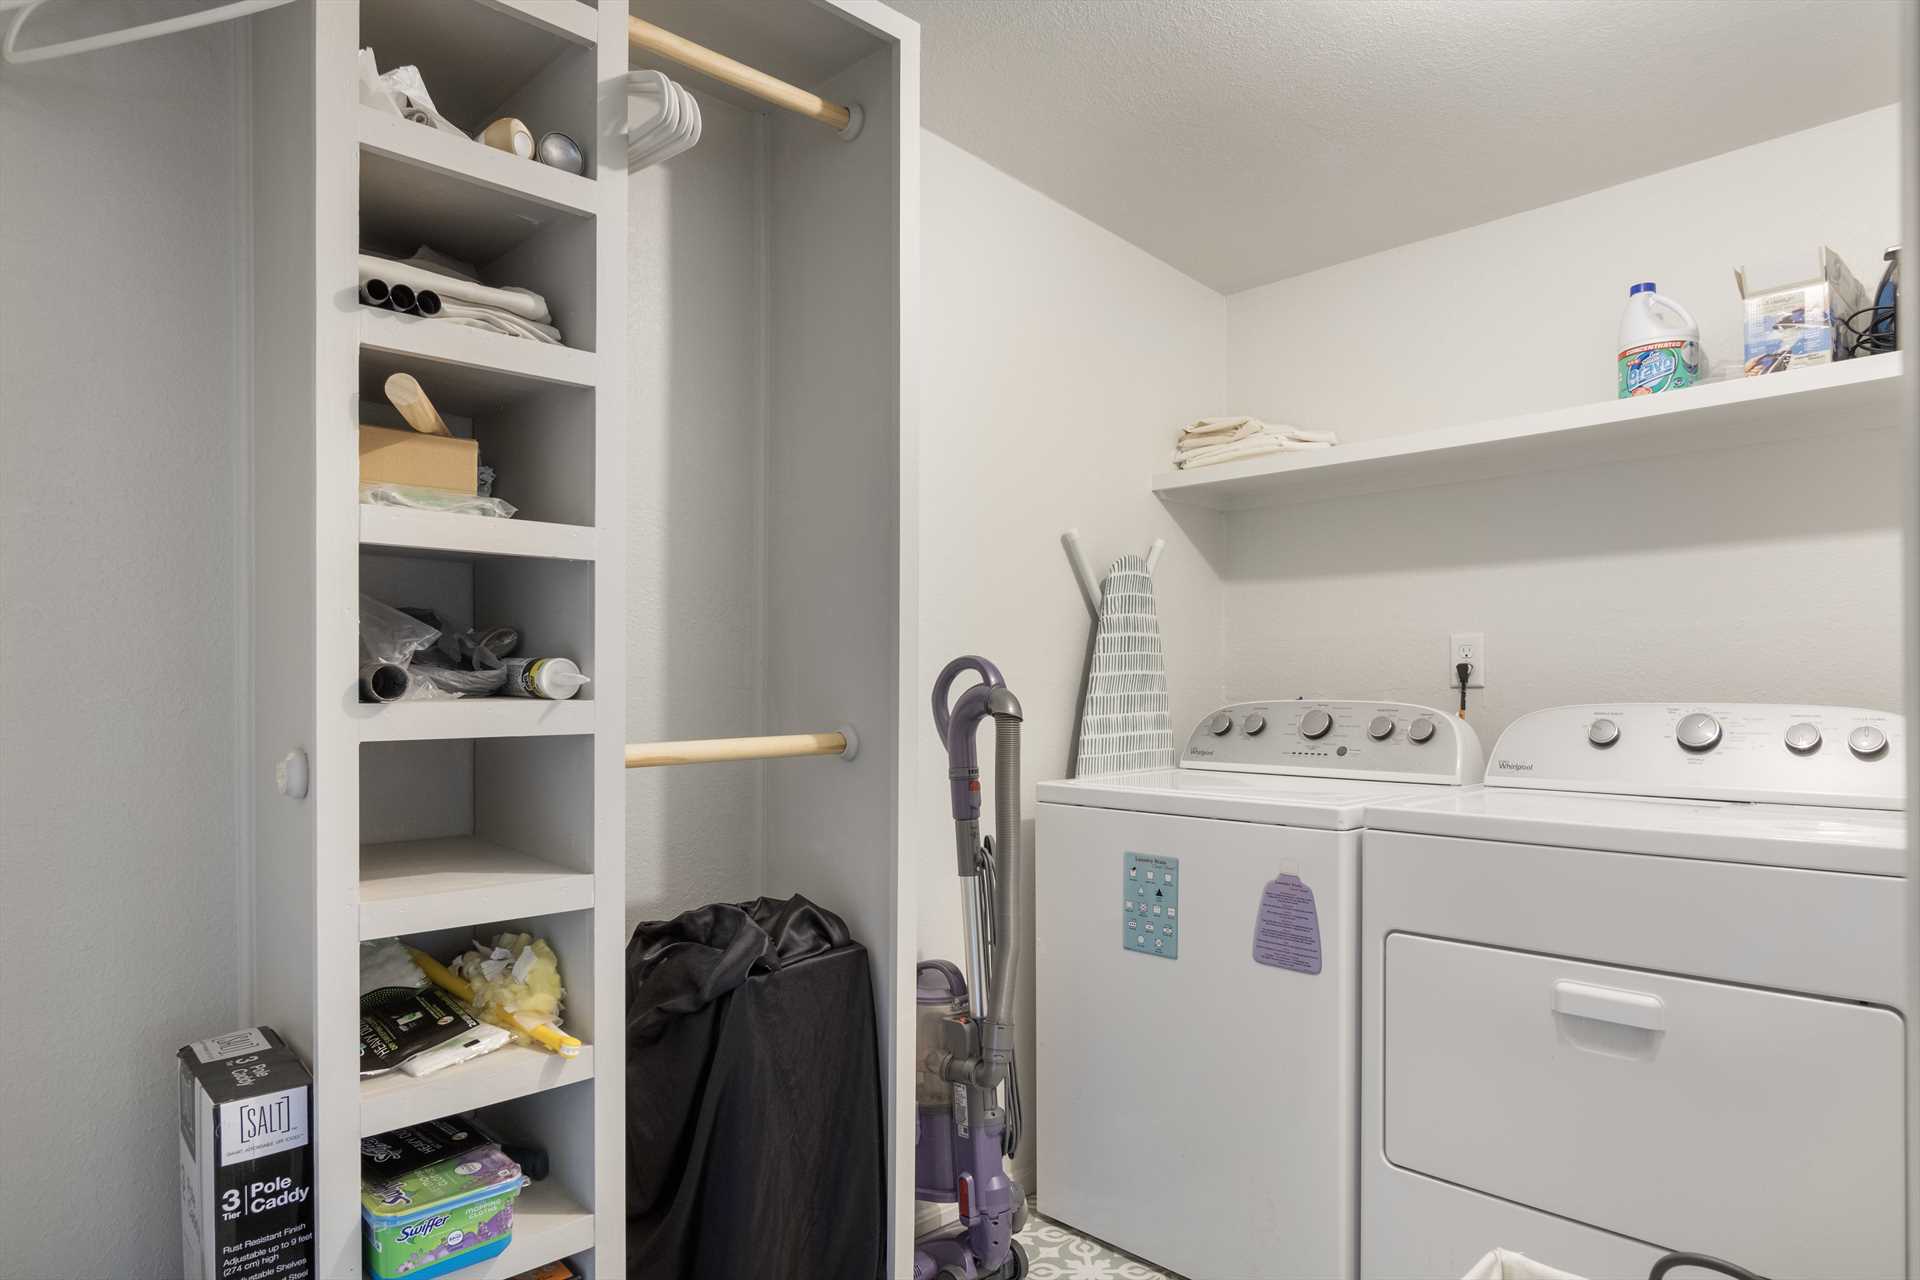                                                 A washer and dryer combo, along with plenty of hanging and storage space, is another convenience you'll find in the River House!